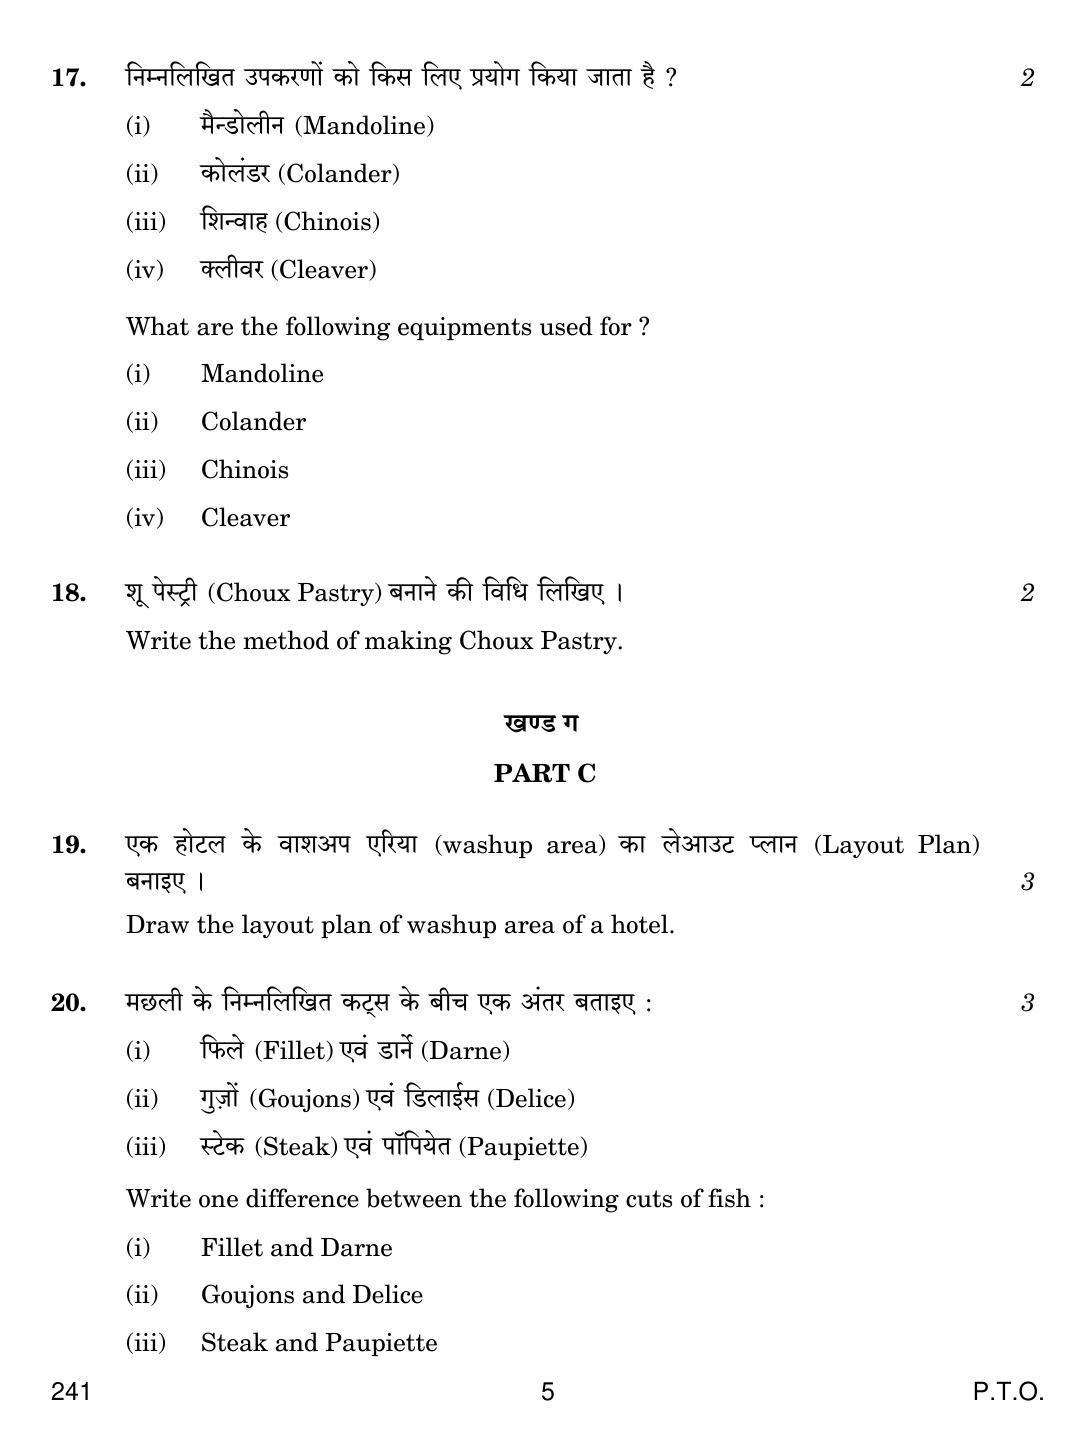 CBSE Class 12 241 FOOD PRODUCTION III 2018 Question Paper - Page 5